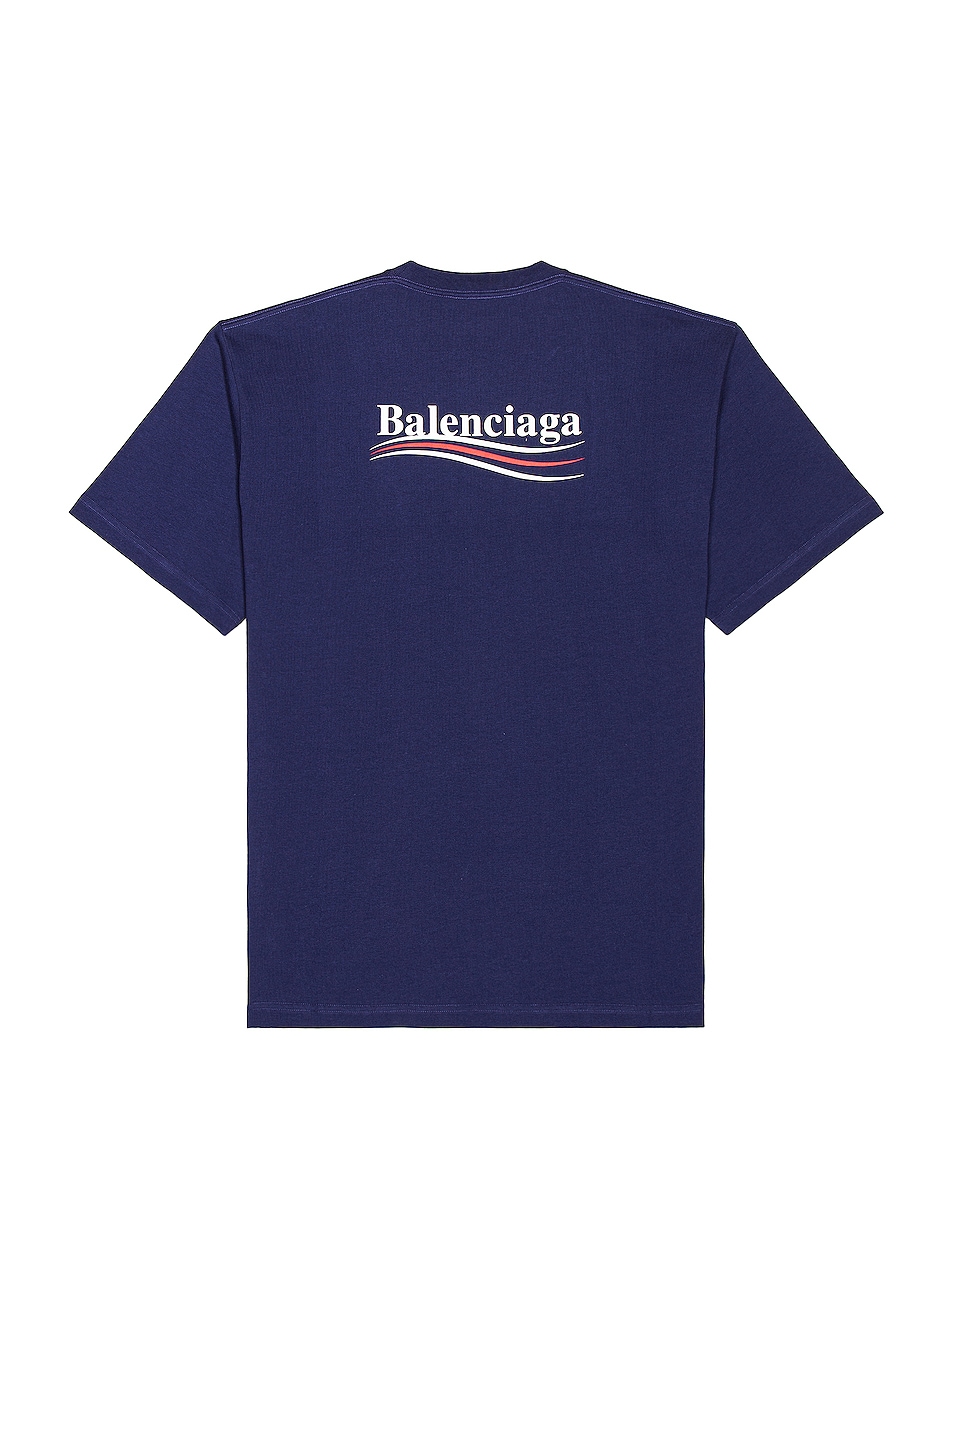 Image 1 of Balenciaga Large Fit Tee in Pacific Blue & White